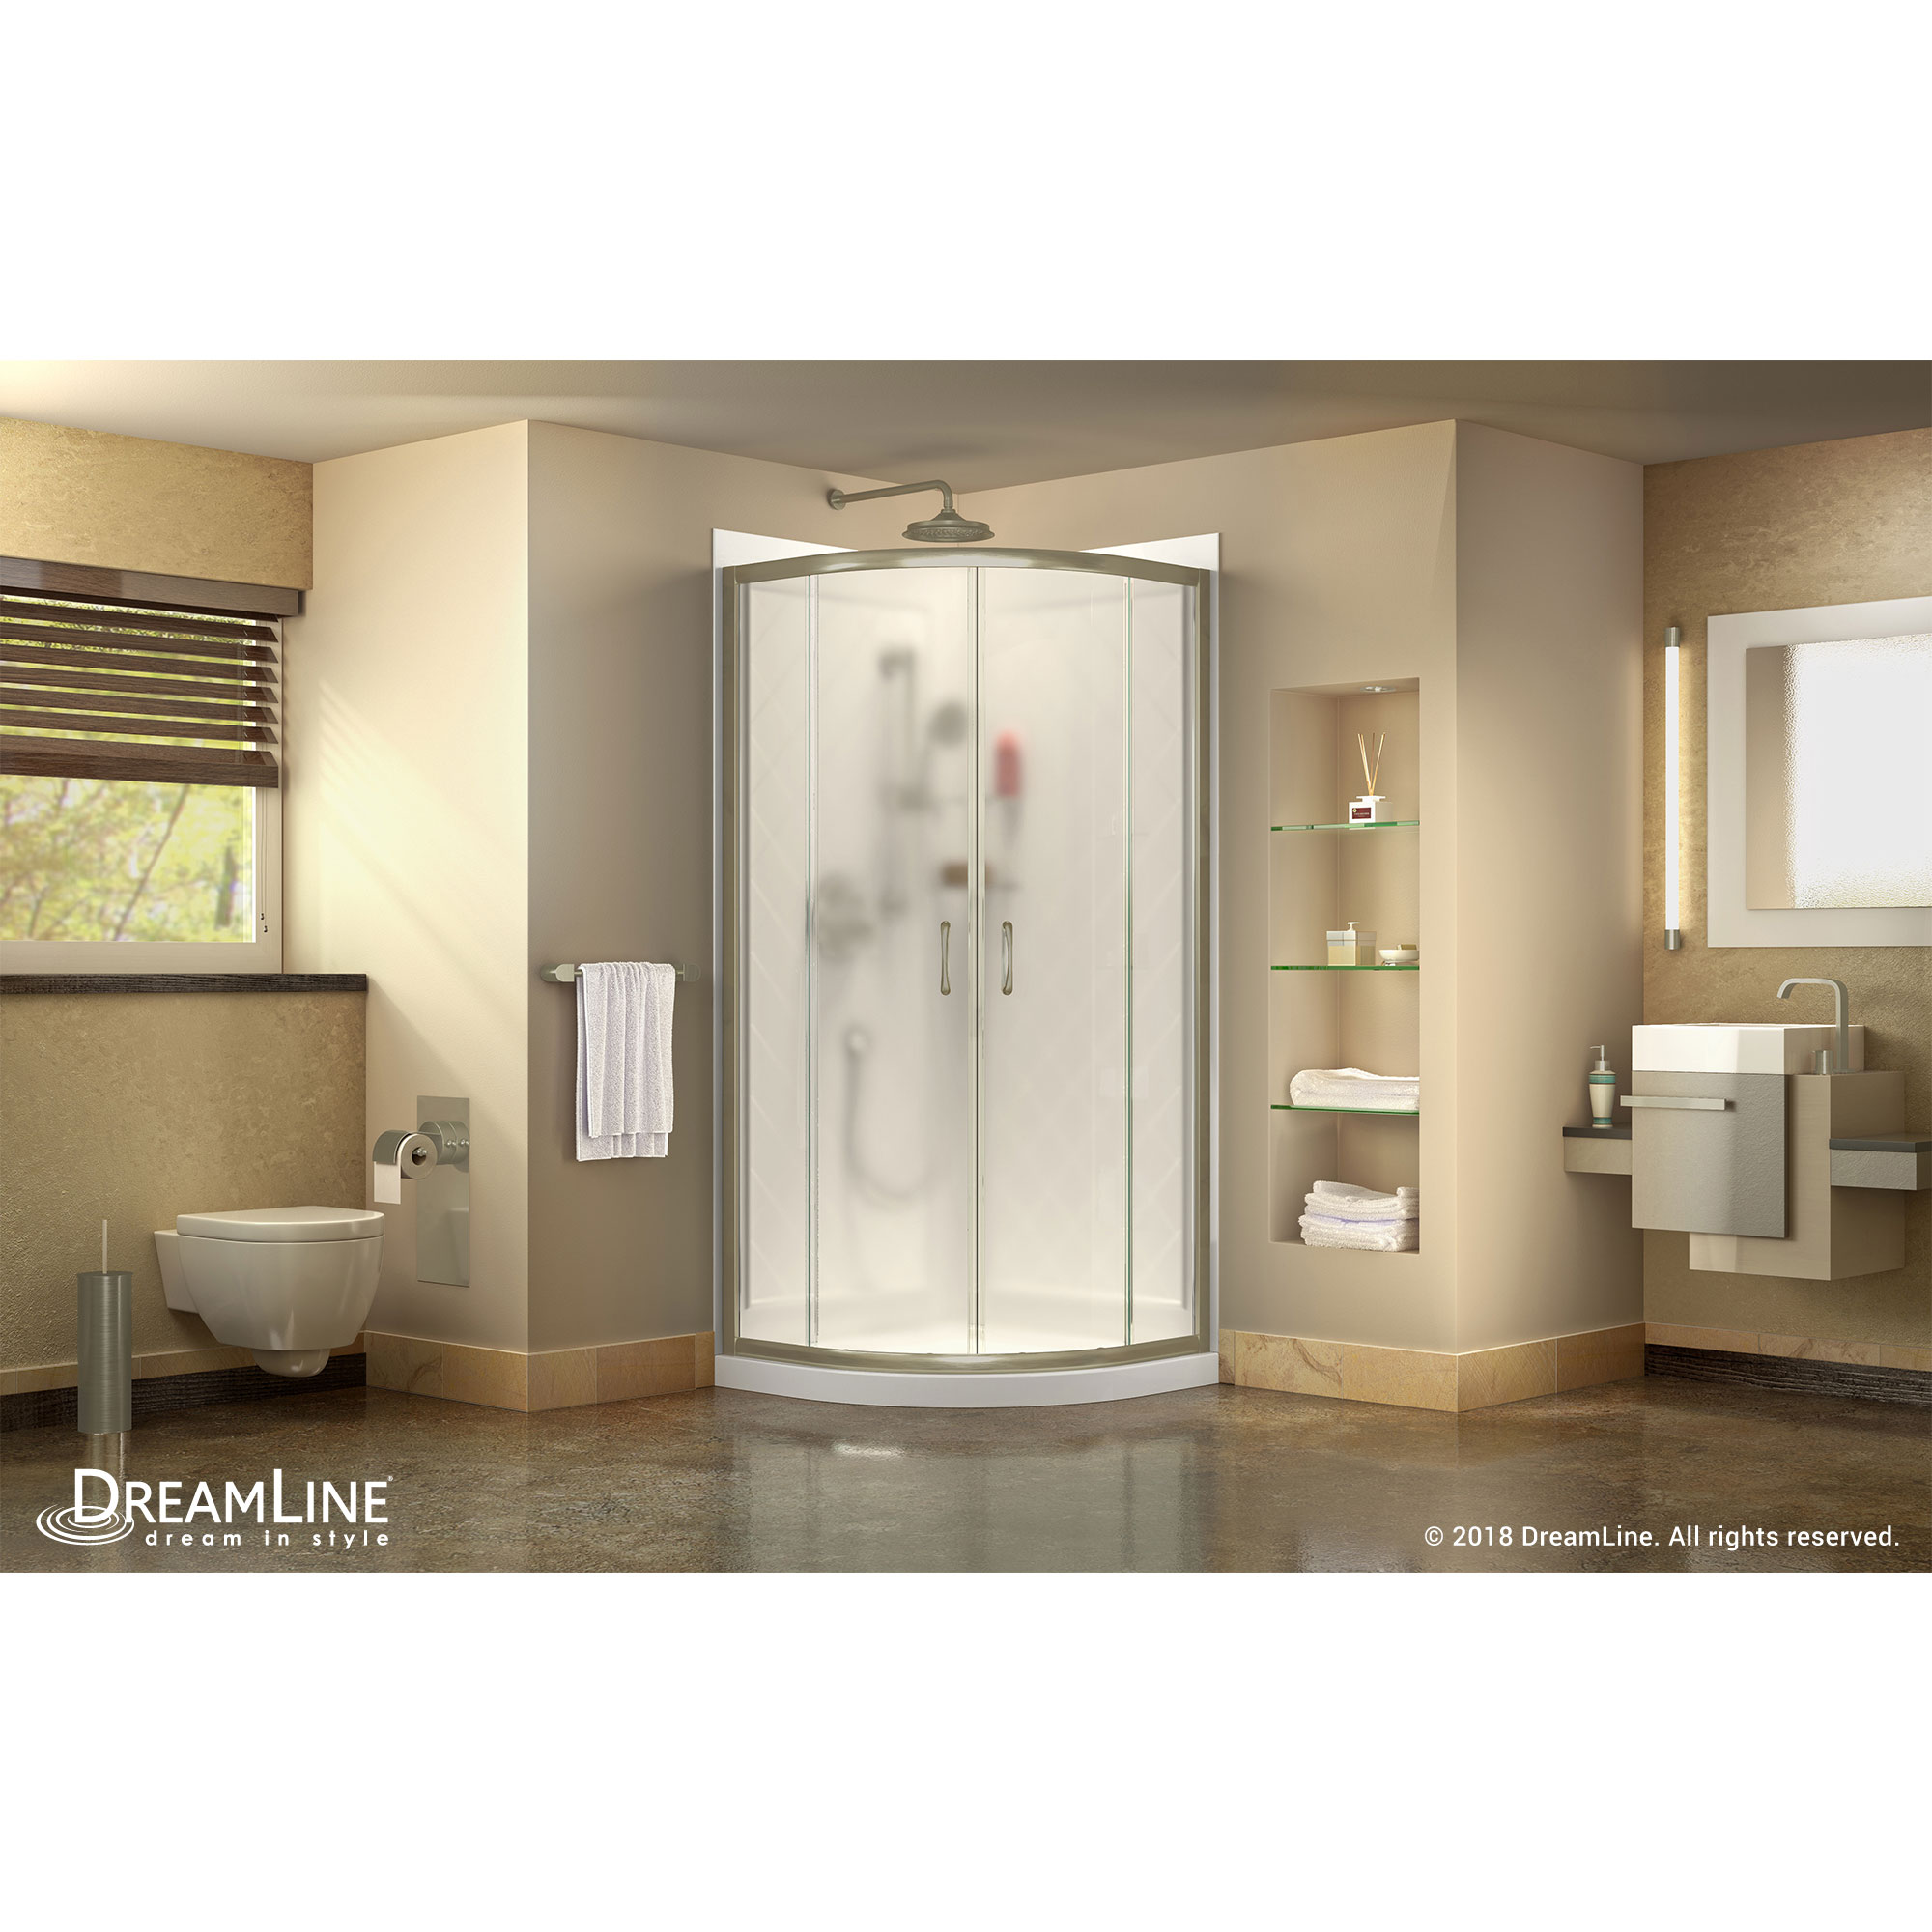 DreamLine Prime 38 in. x 76 3/4 in. Semi-Frameless Frosted Glass Sliding Shower Enclosure in Brushed Nickel with Base and Backwa